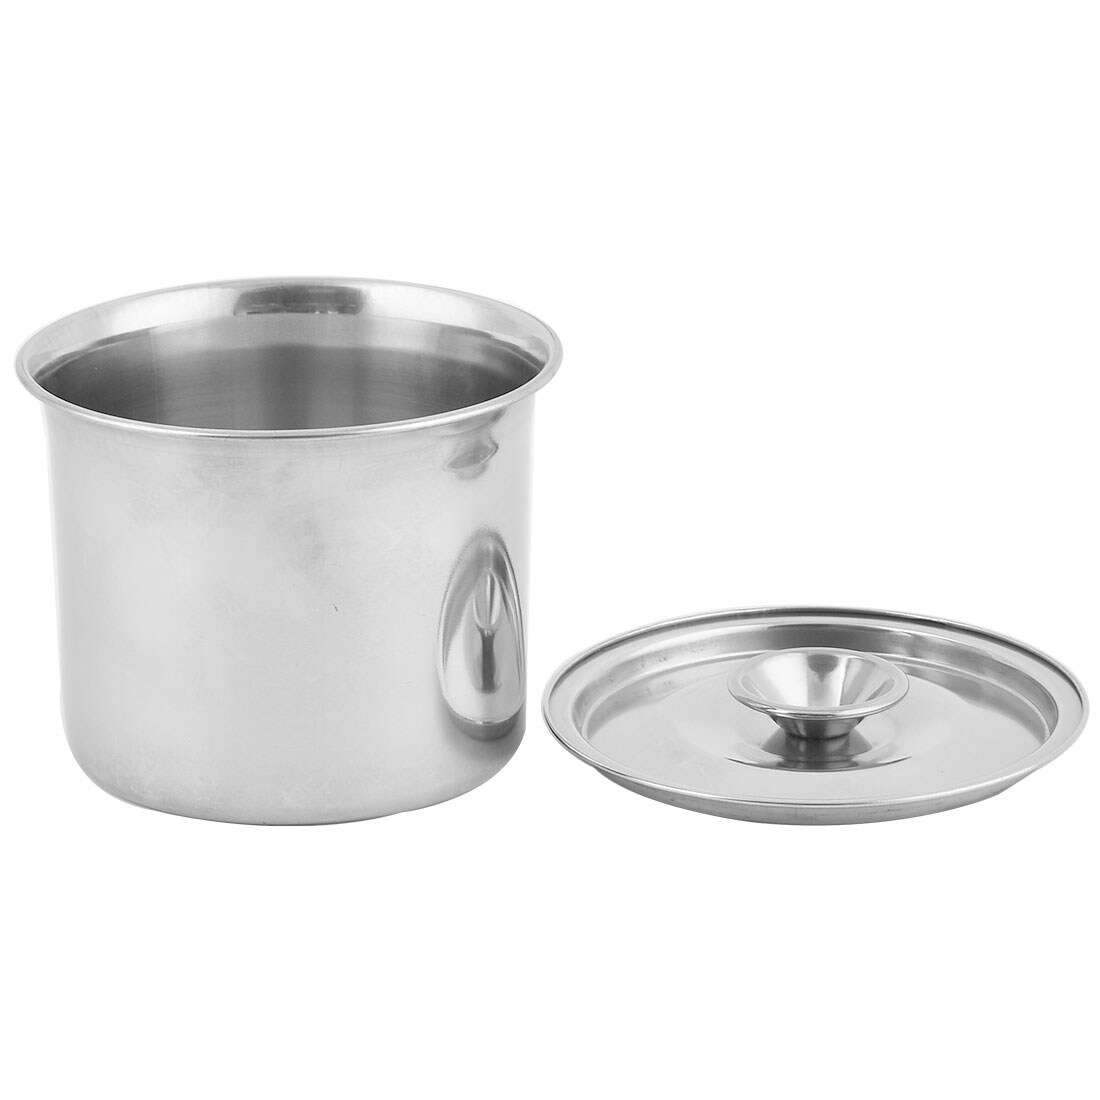 https://ak1.ostkcdn.com/images/products/is/images/direct/e05c2219aa33b629b2e37da9211e50c199e78468/Restaurant-Stainless-Steel-Sauce-Condiment-Dipping-Storage-Container-Box-3pcs.jpg